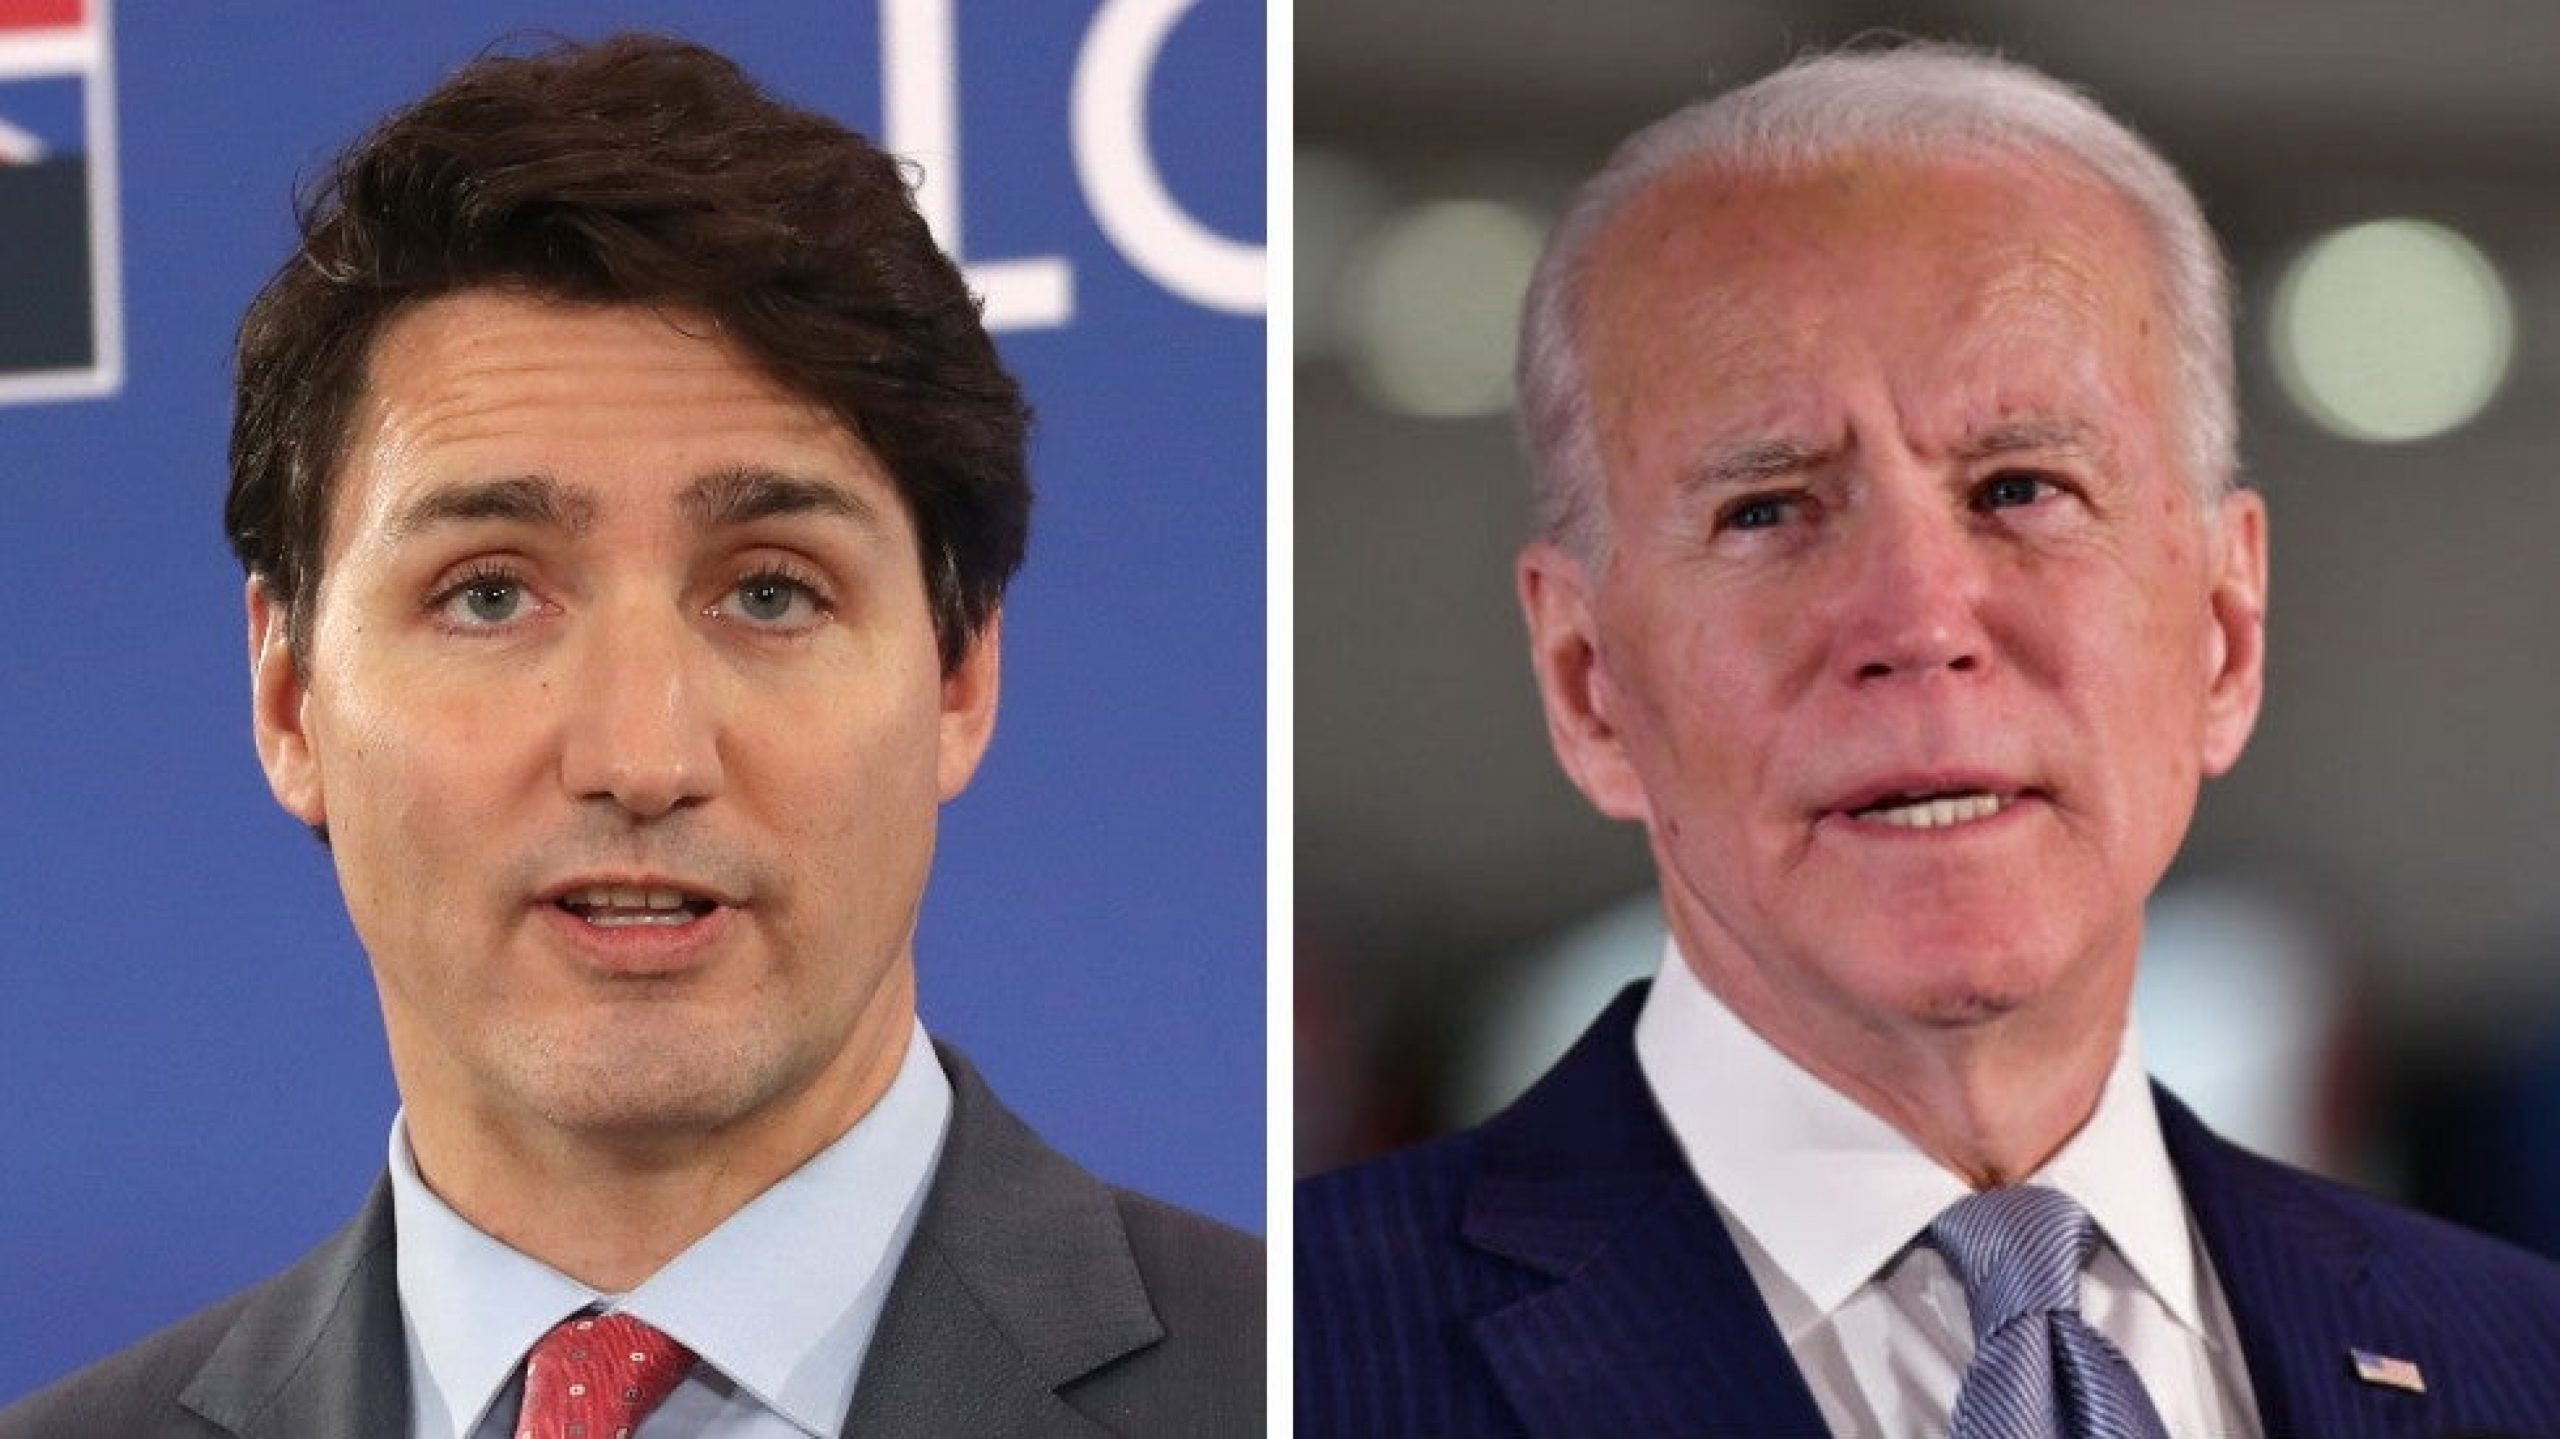 Trudeau says no deal on lifting border restrictions after talks with Biden